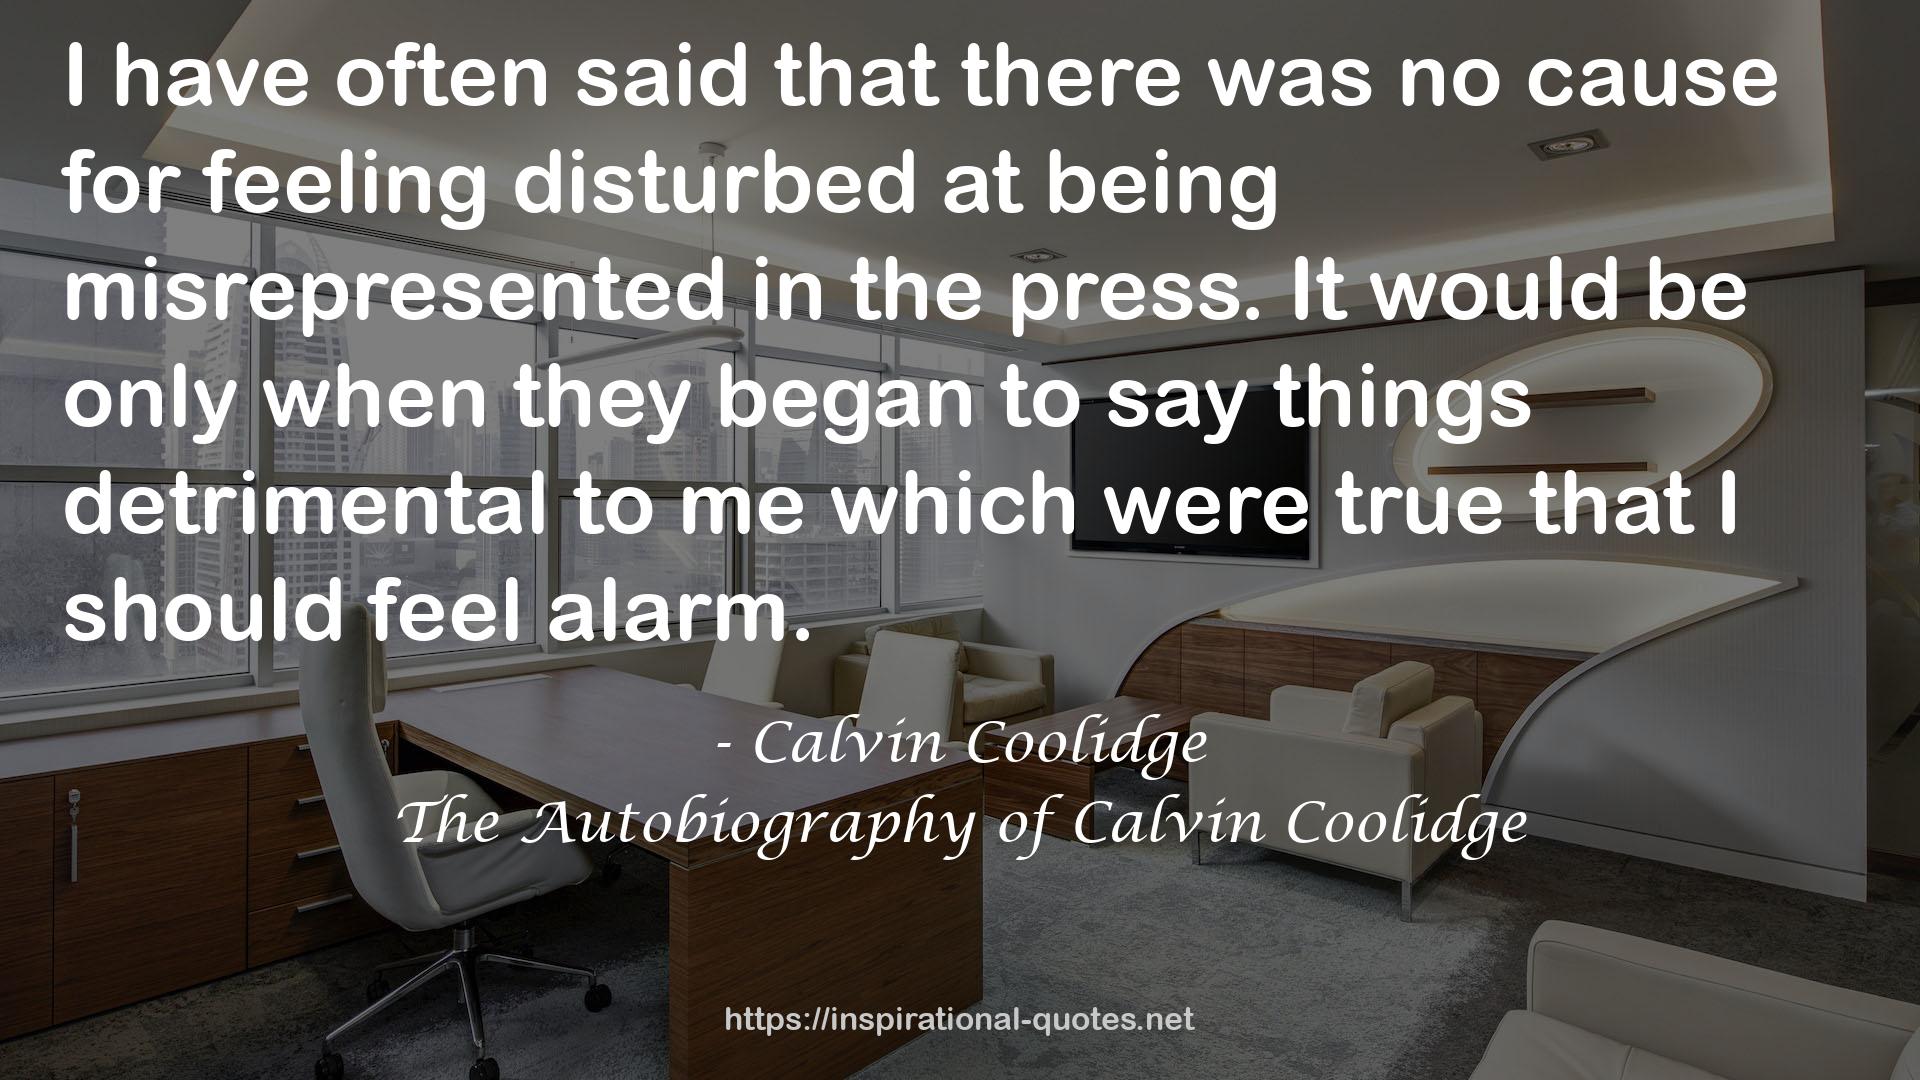 The Autobiography of Calvin Coolidge QUOTES